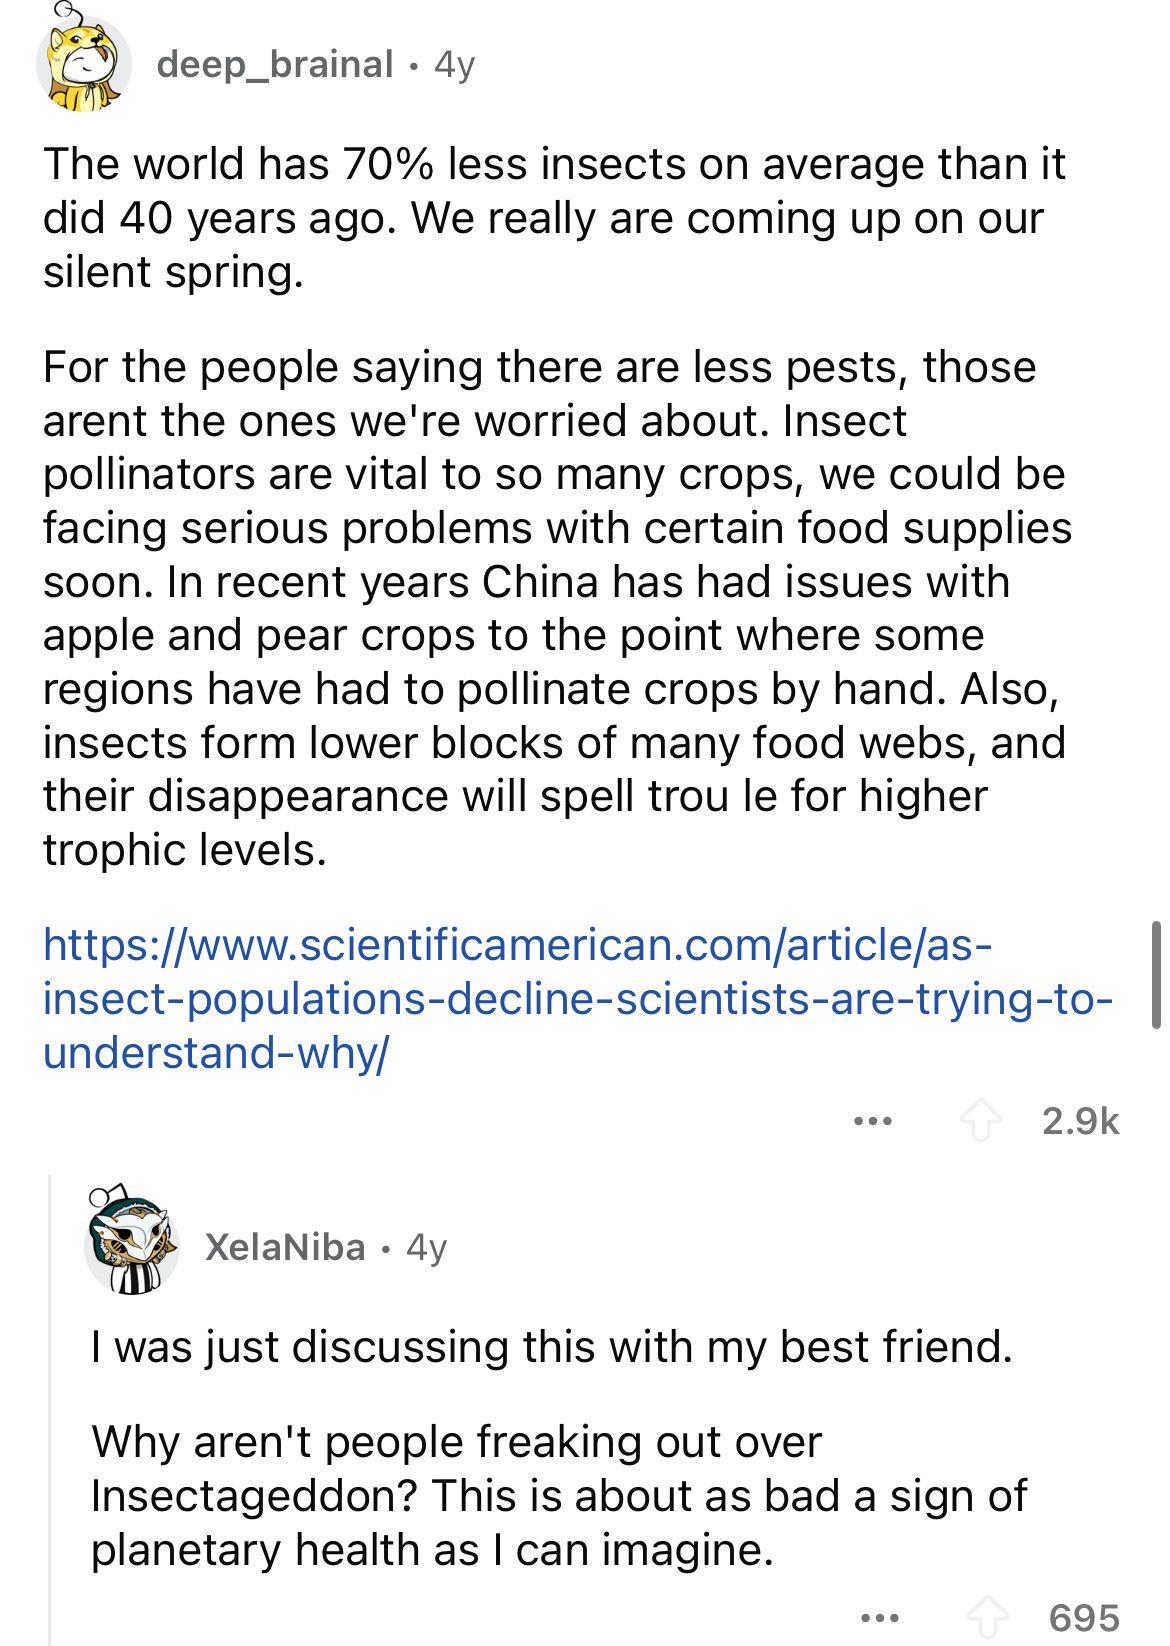 document - deep_brainal 4y The world has 70% less insects on average than it did 40 years ago. We really are coming up on our silent spring. For the people saying there are less pests, those arent the ones we're worried about. Insect pollinators are vital